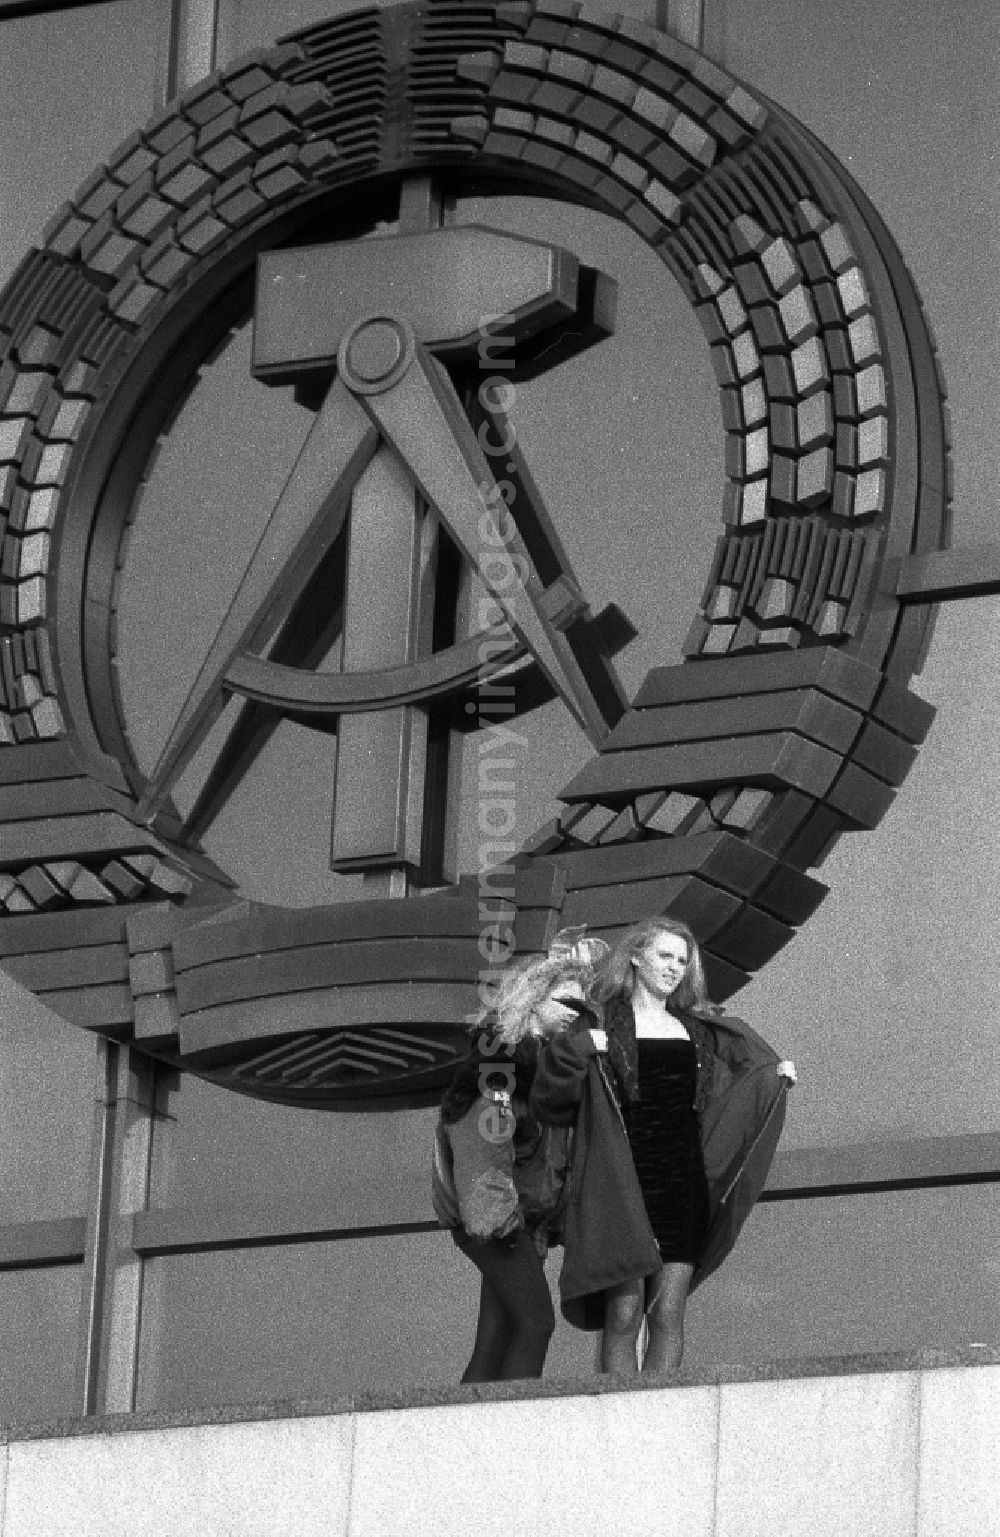 GDR photo archive: Berlin - As a young woman, Anja Kossak presents the latest women's fashion collection at a Playmate photo shoot in front of the entrance area of the Palace of the Republic in the district Mitte in Berlin, which is decorated with the national coat of arms. East Berlin on the territory of the former GDR, German Democratic Republic